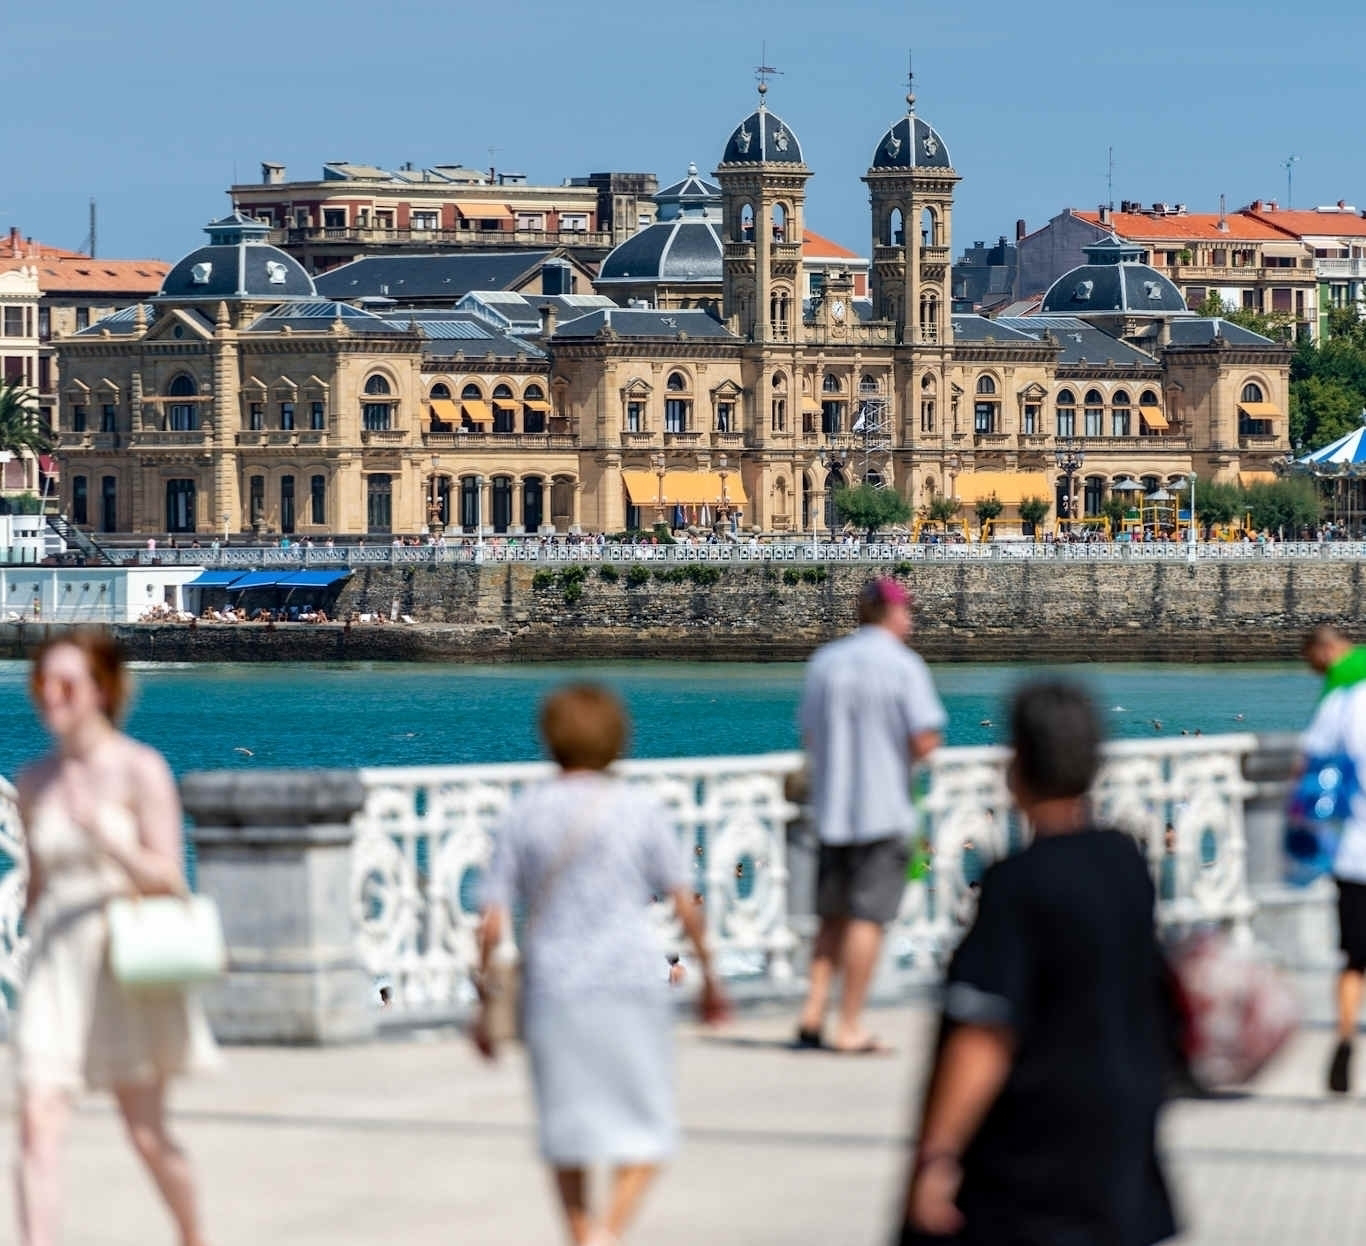 promenade of San Sebastian with city hall and strolling pedestrians in the foreground